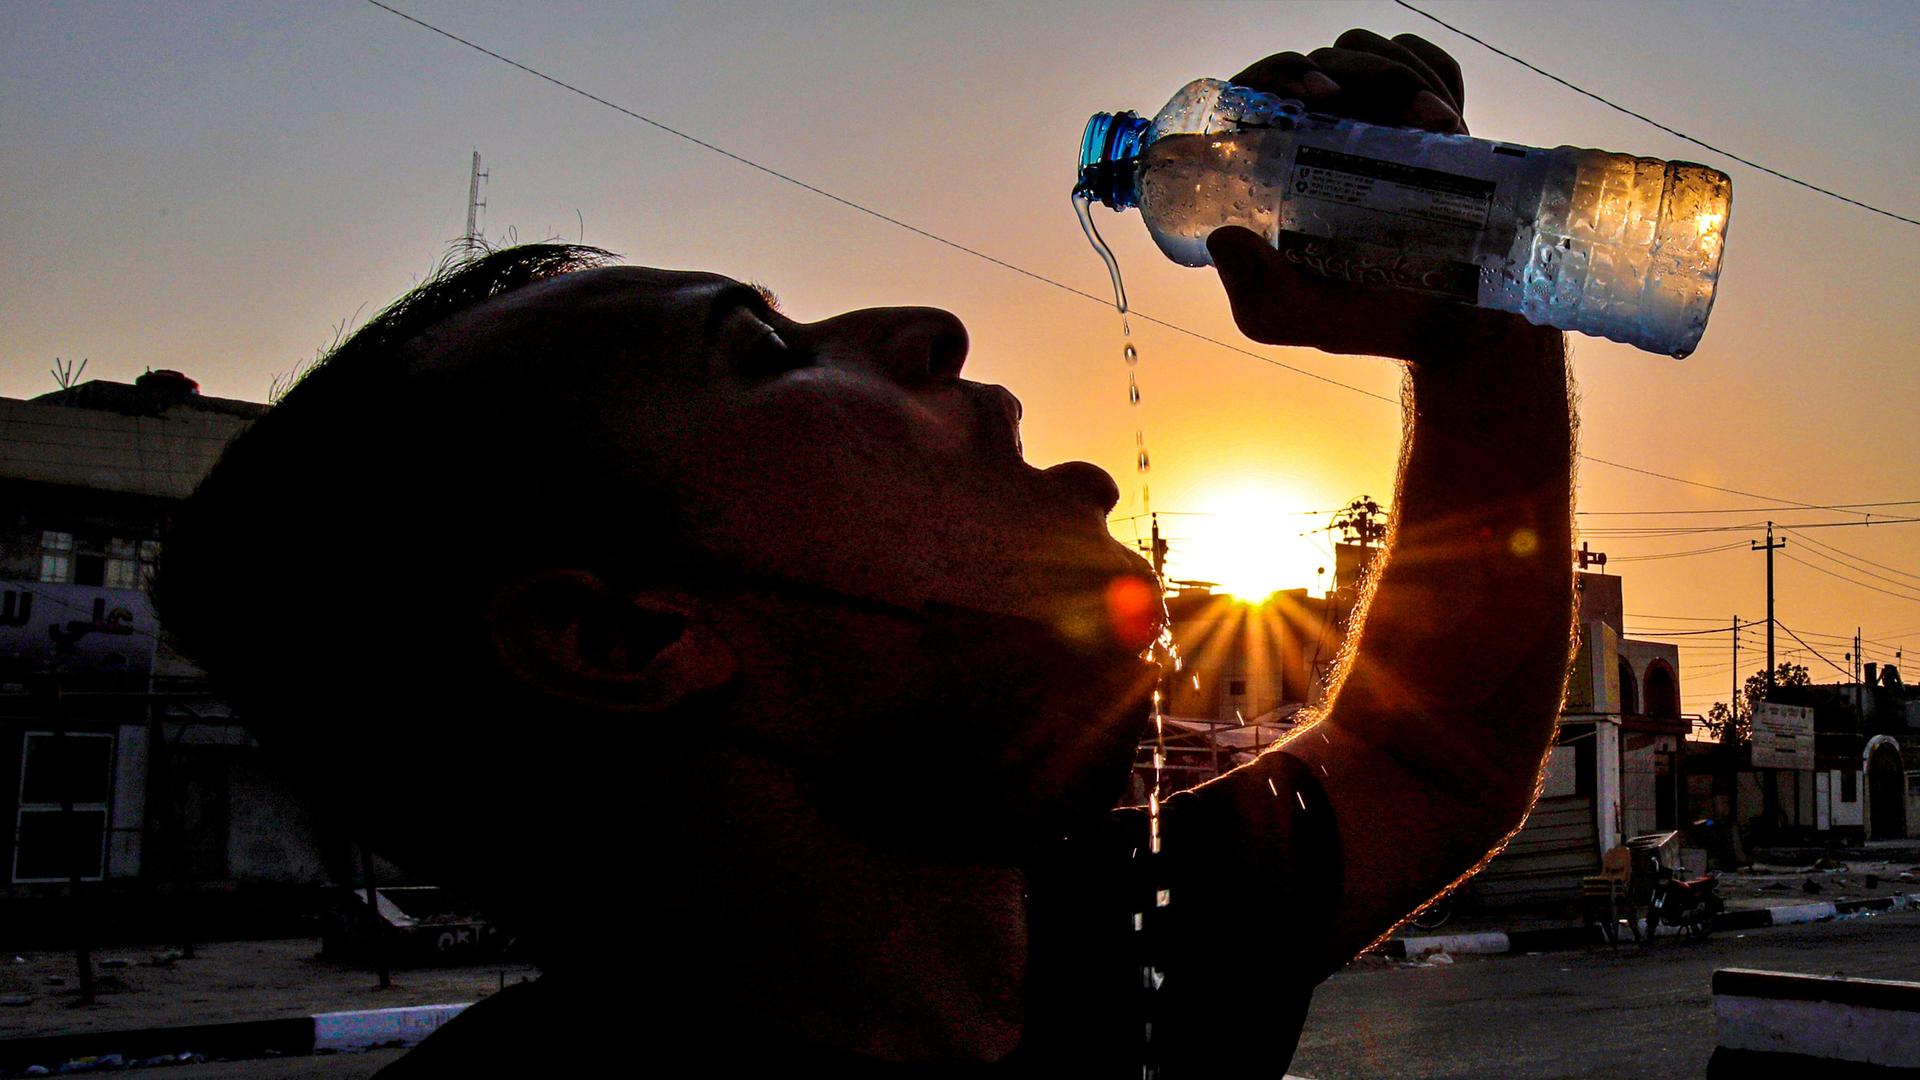 A man is shown in shadow drinking from a water bottle with the sun setting behind him.